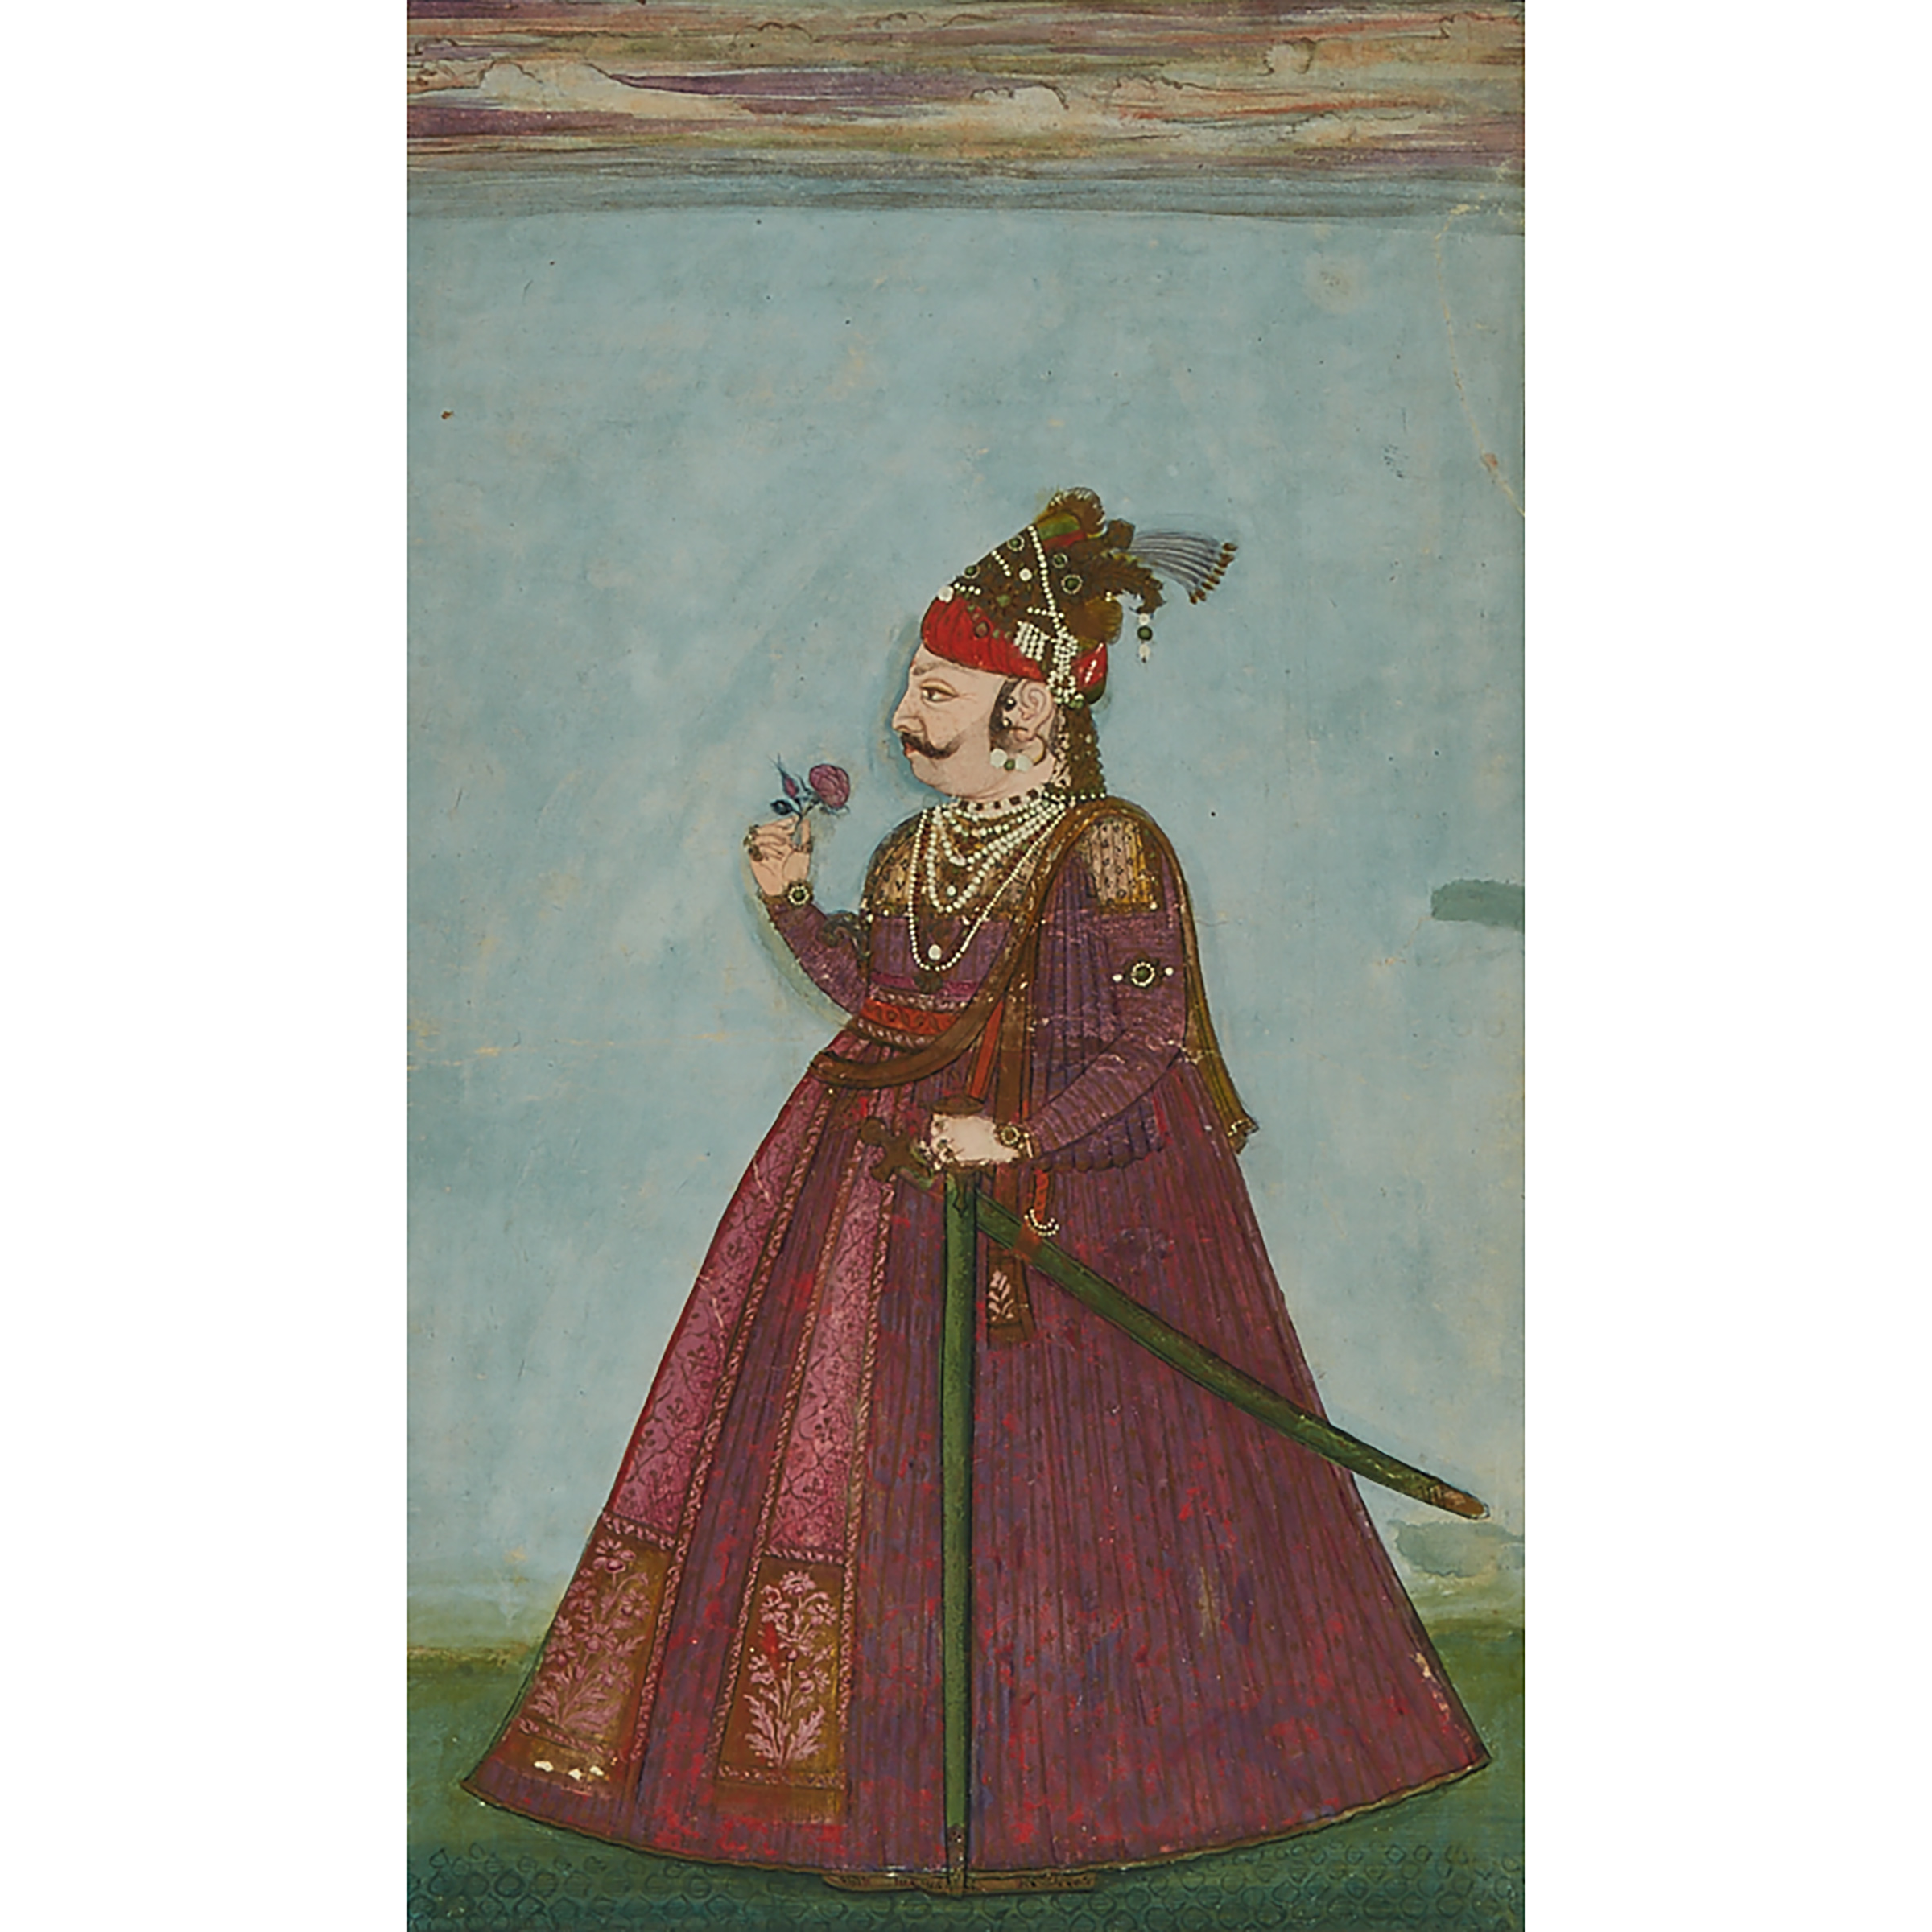 Bikaner School, Portrait of a Standing Prince, Early 19th Century